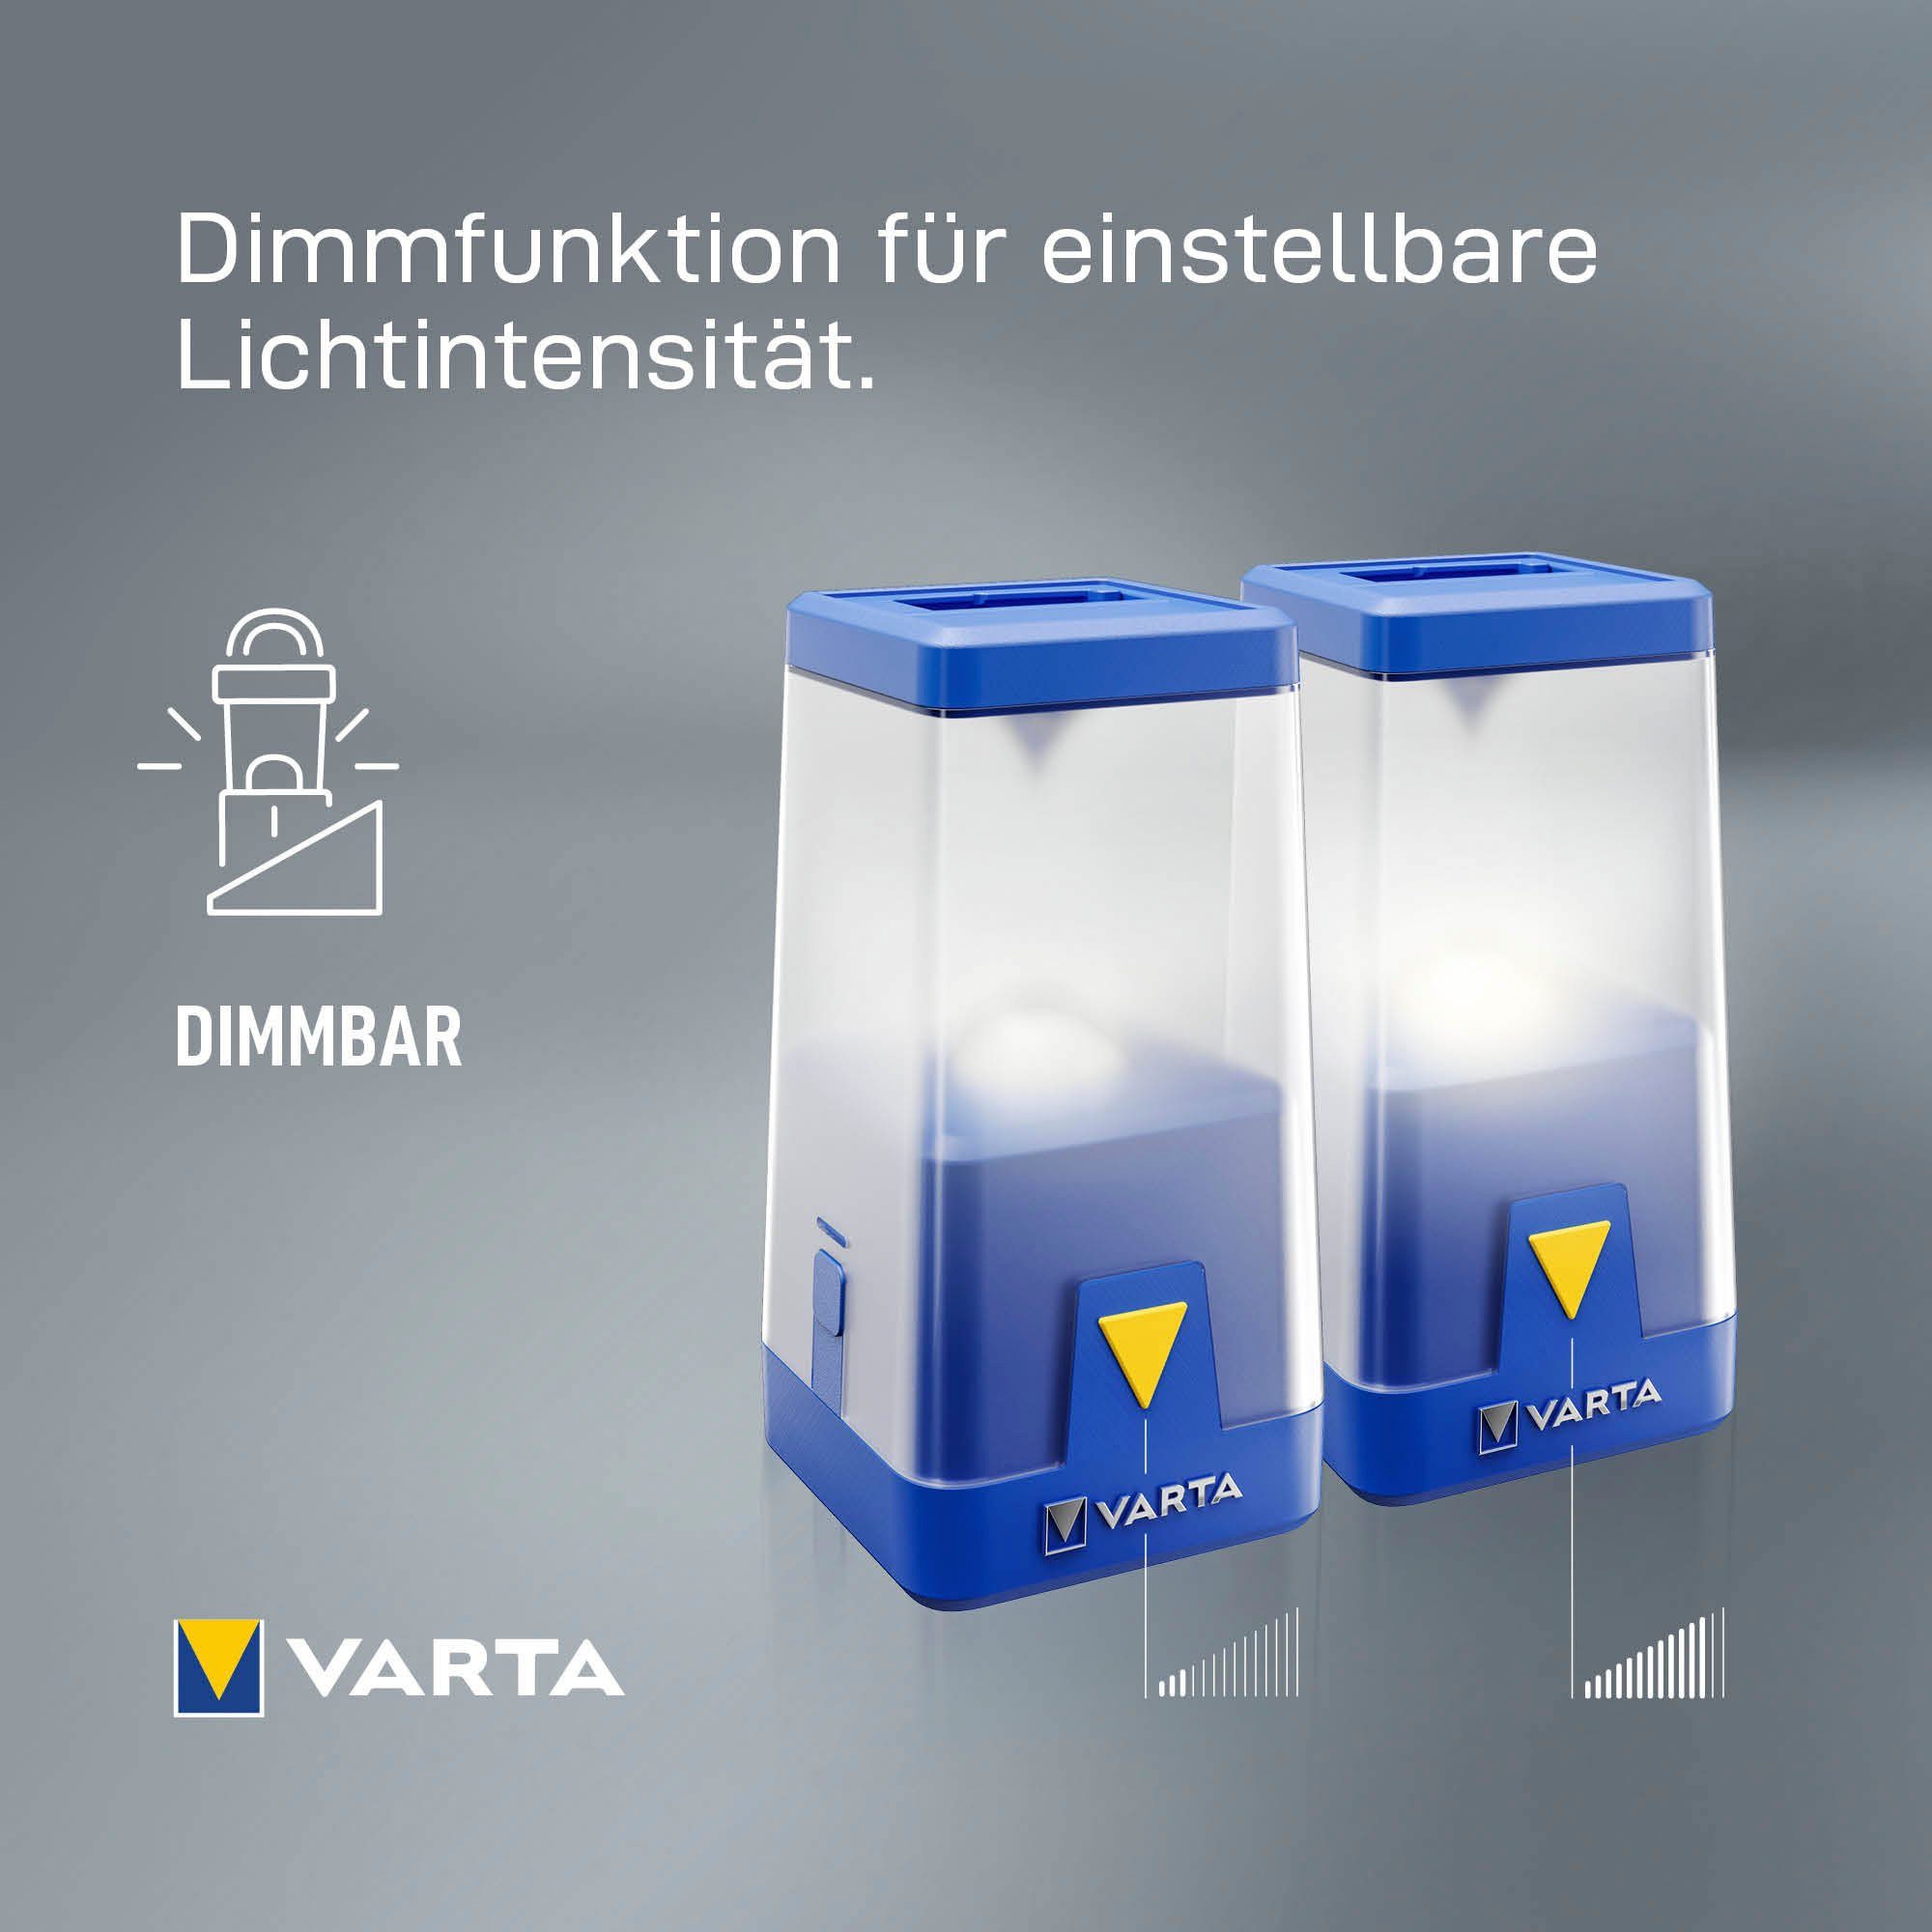 L20 Ambiance VARTA Laterne Outdoor Laterne